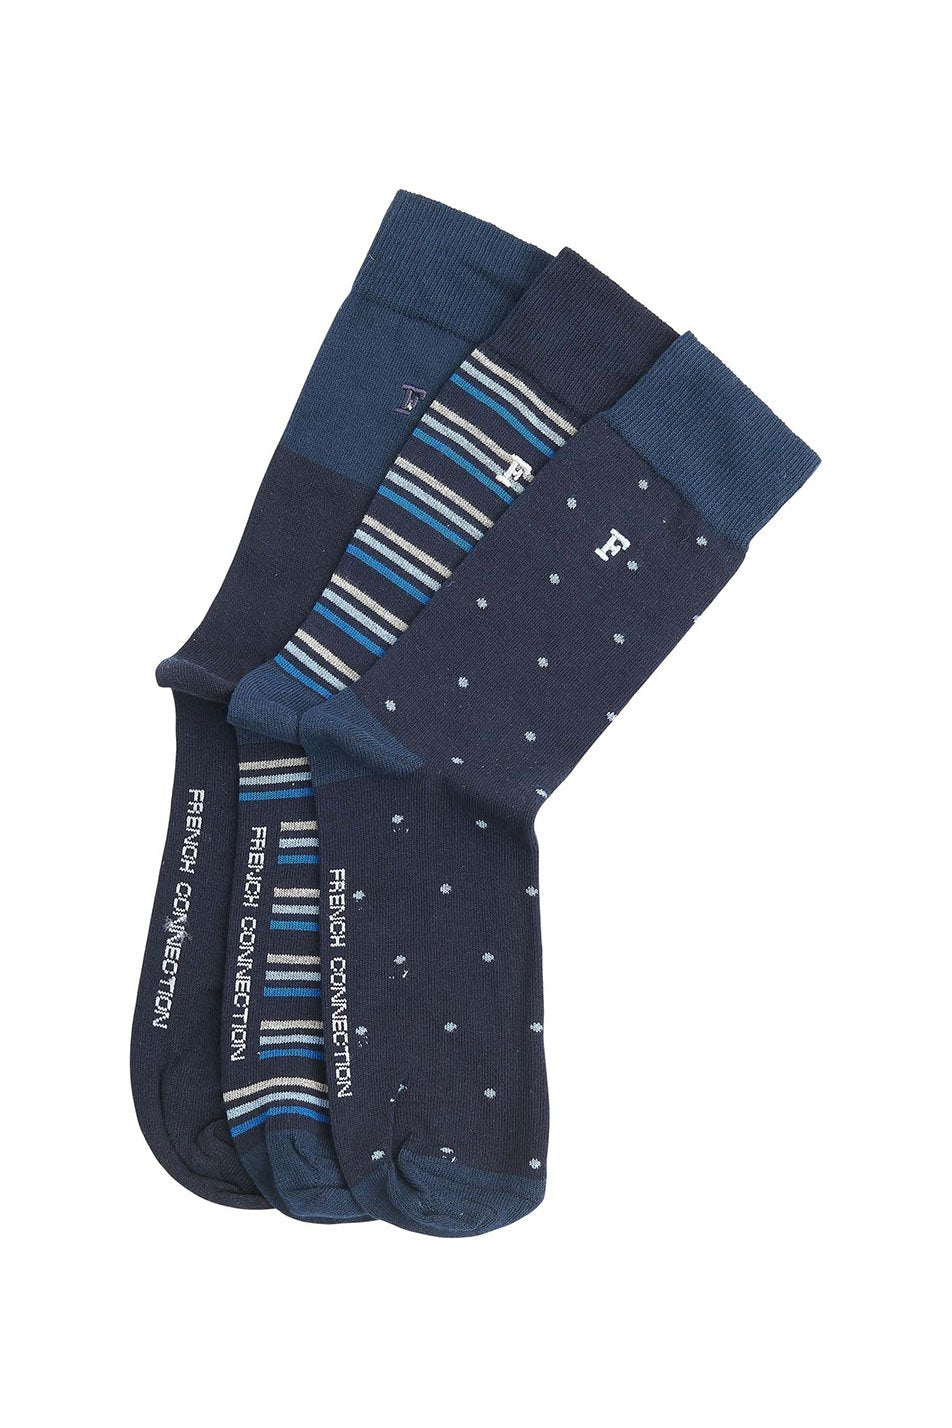 French Connection 3 Pack Waterfall Men's Socks